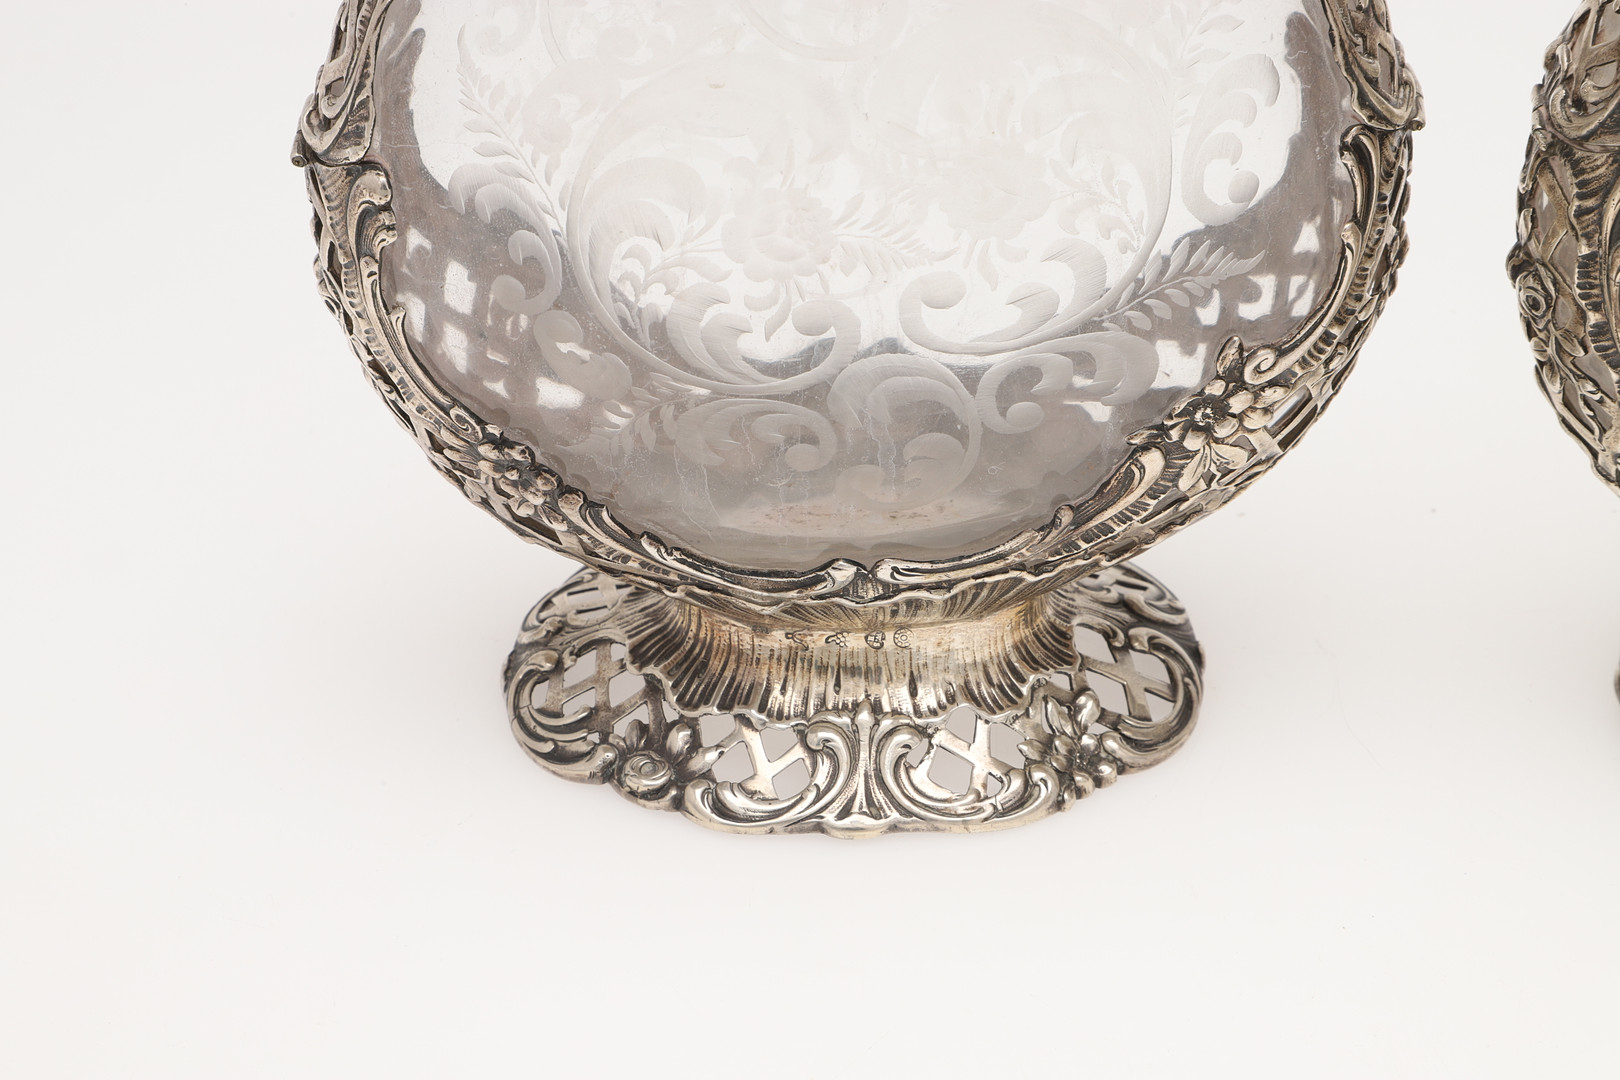 A PAIR OF LATE 19TH/ EARLY 20TH CENTURY GERMAN SILVER MOUNTED DECANTERS. - Image 5 of 13